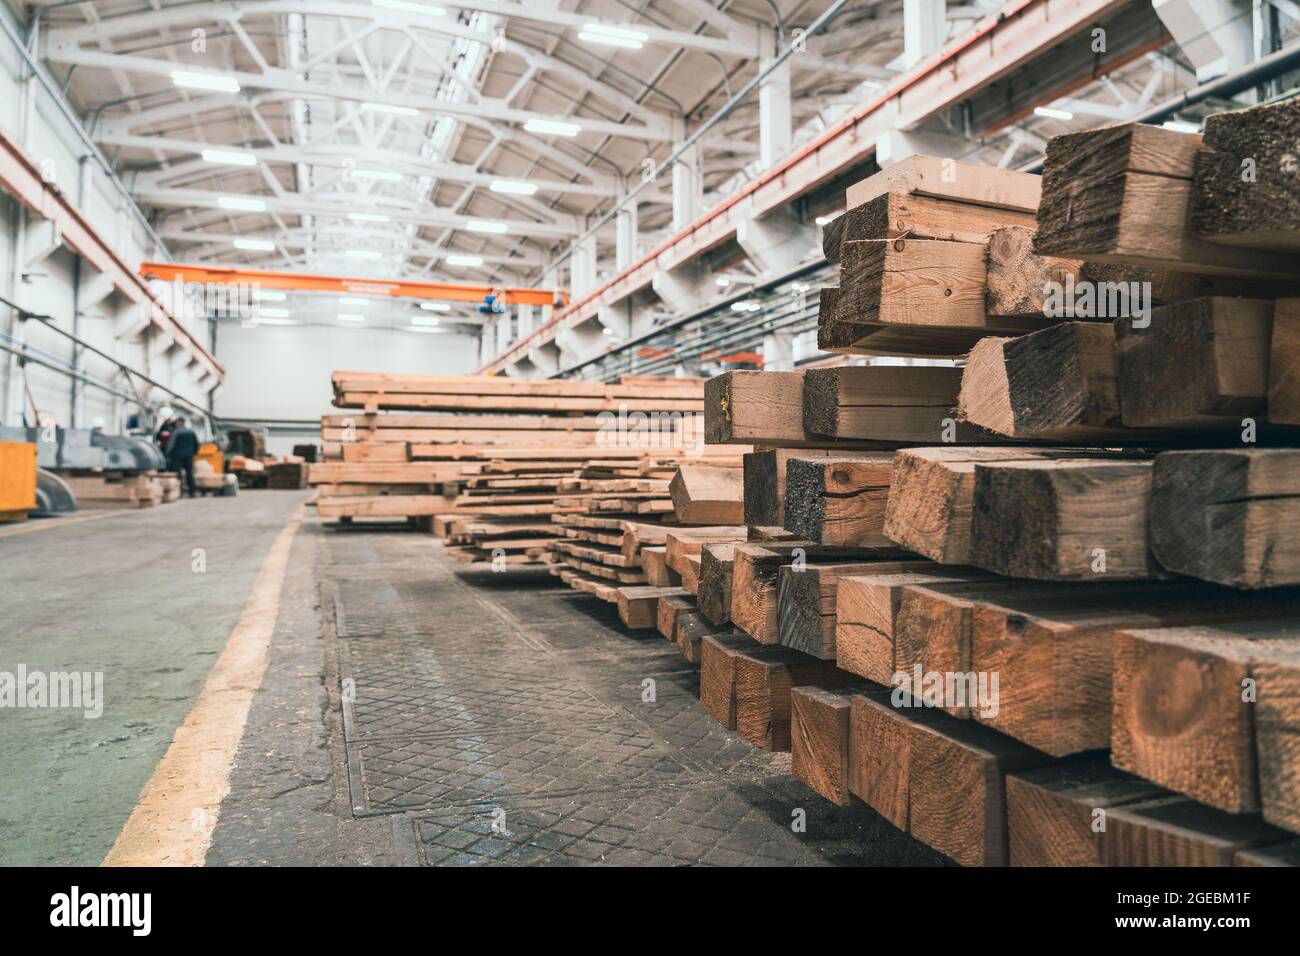 Woodwork factory with stacks of wood and equipment machinery. Professional industrial carpentry manufacturing. Stock Photo